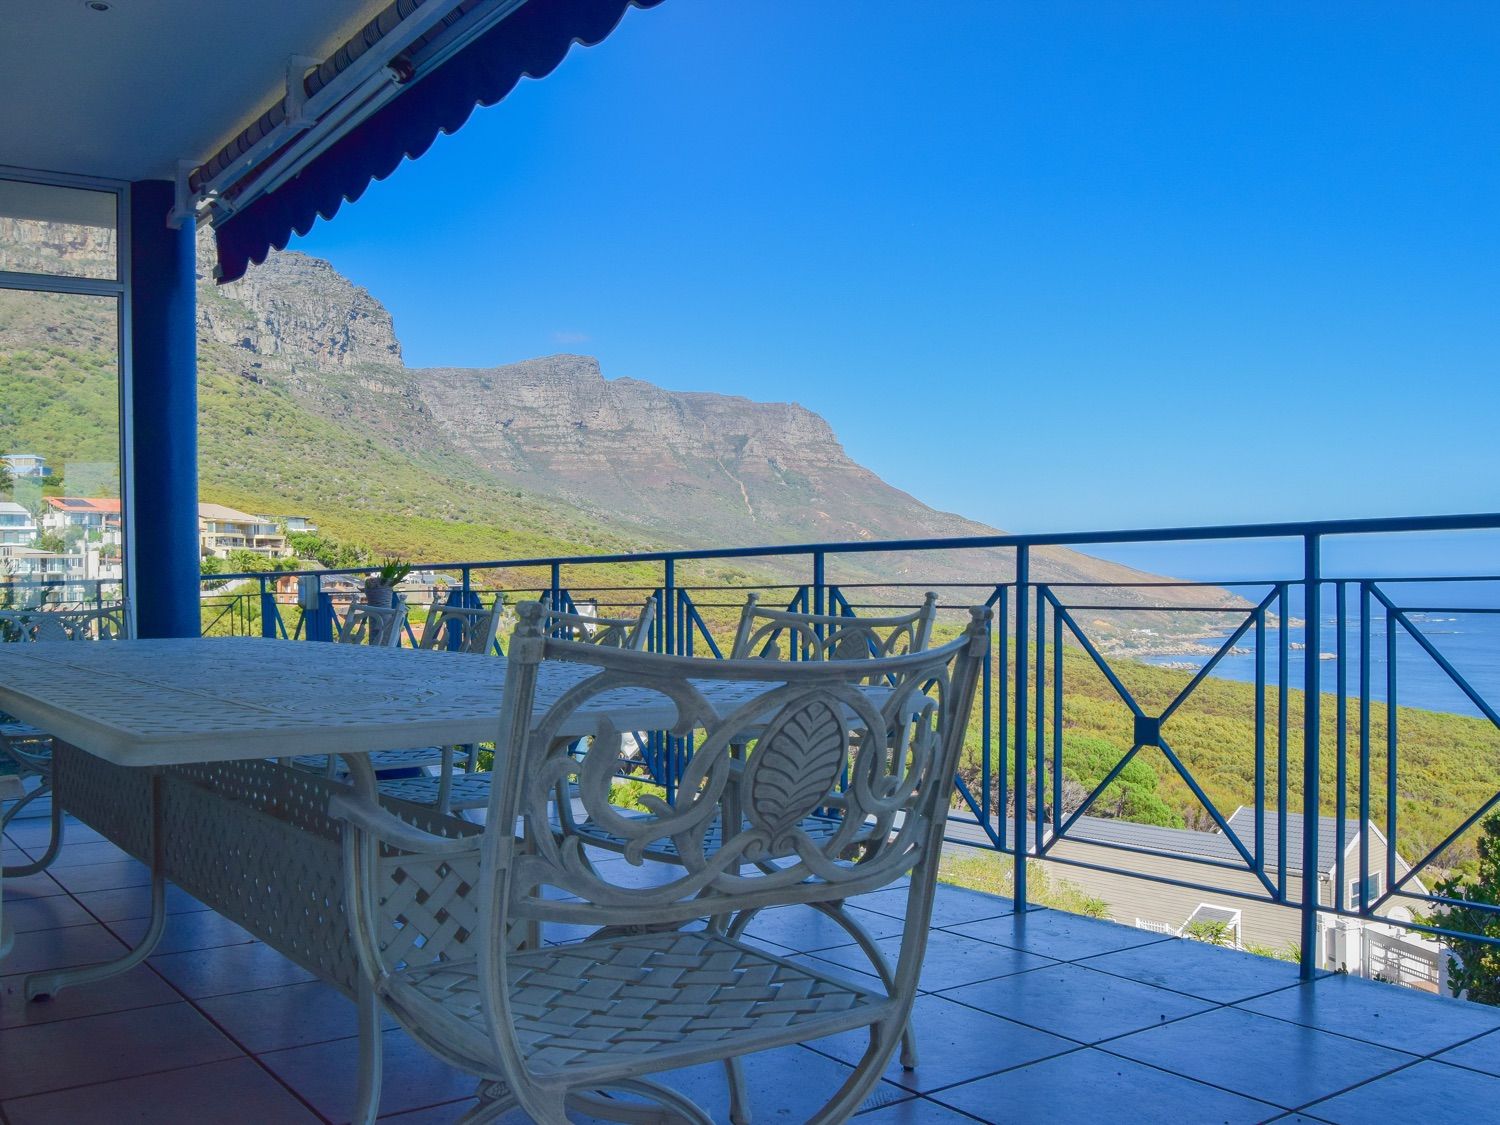 Photo 5 of Oceanscape Camps Bay accommodation in Camps Bay, Cape Town with 4 bedrooms and 4 bathrooms